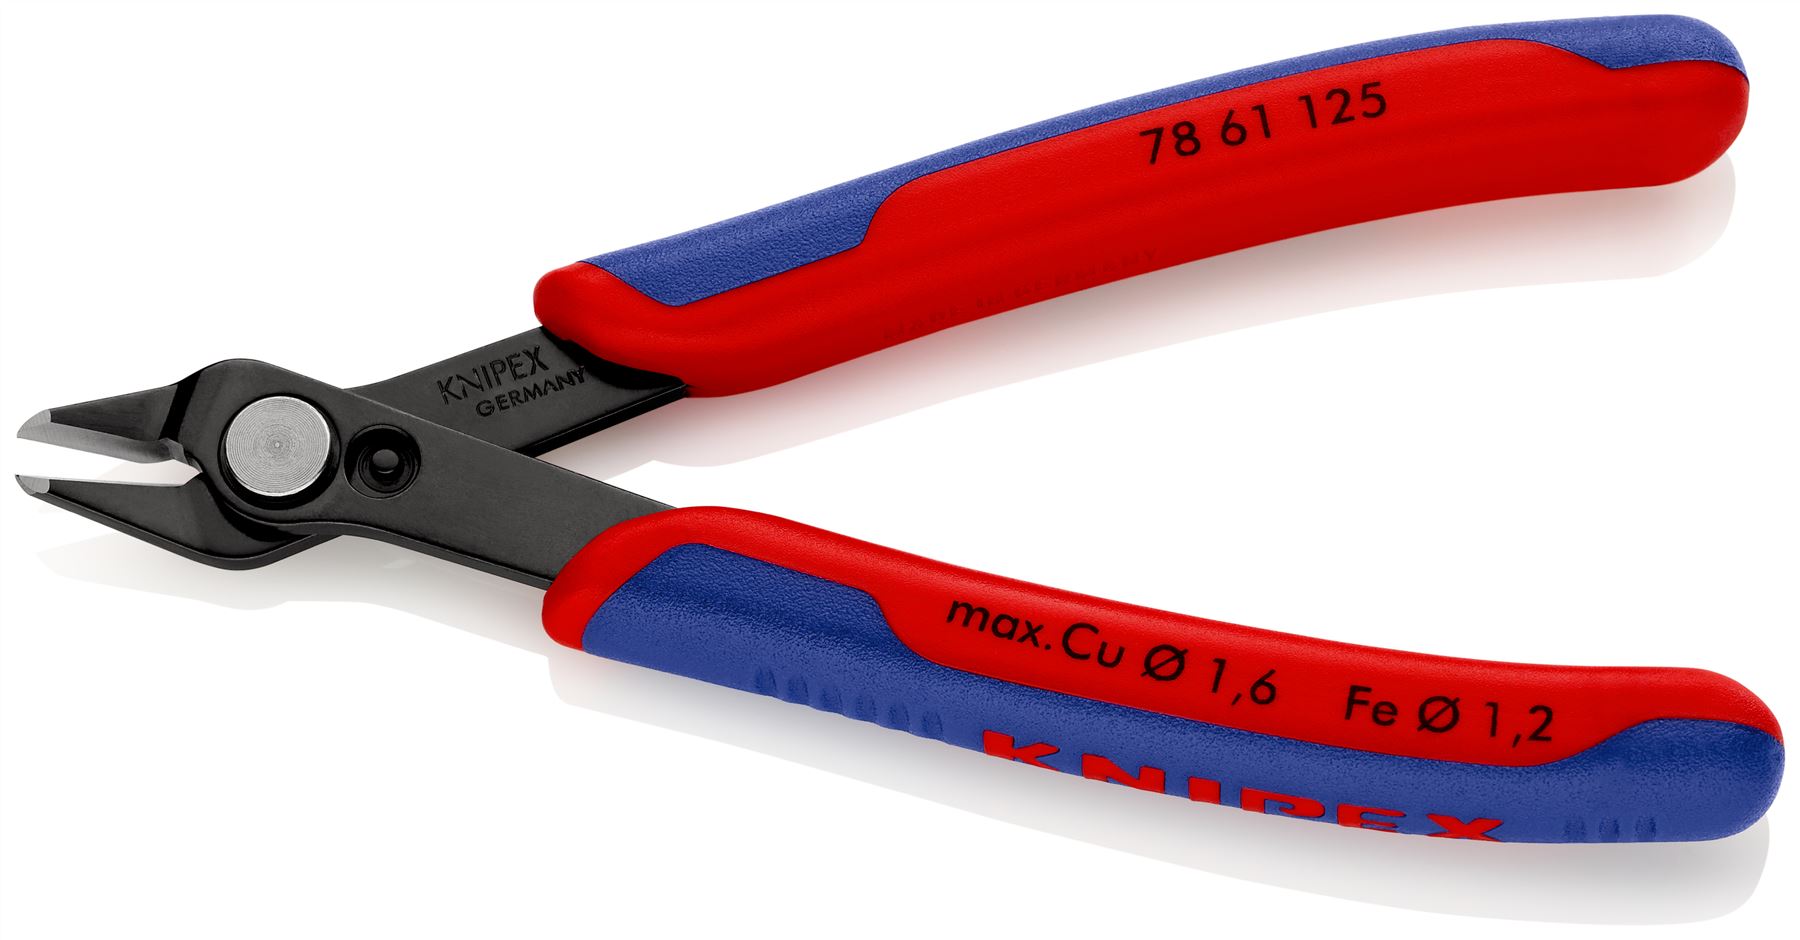 KNIPEX Electronics Super Knips Precision Cutting Pliers 125mm Multi Component Grips 78 61 125 SB